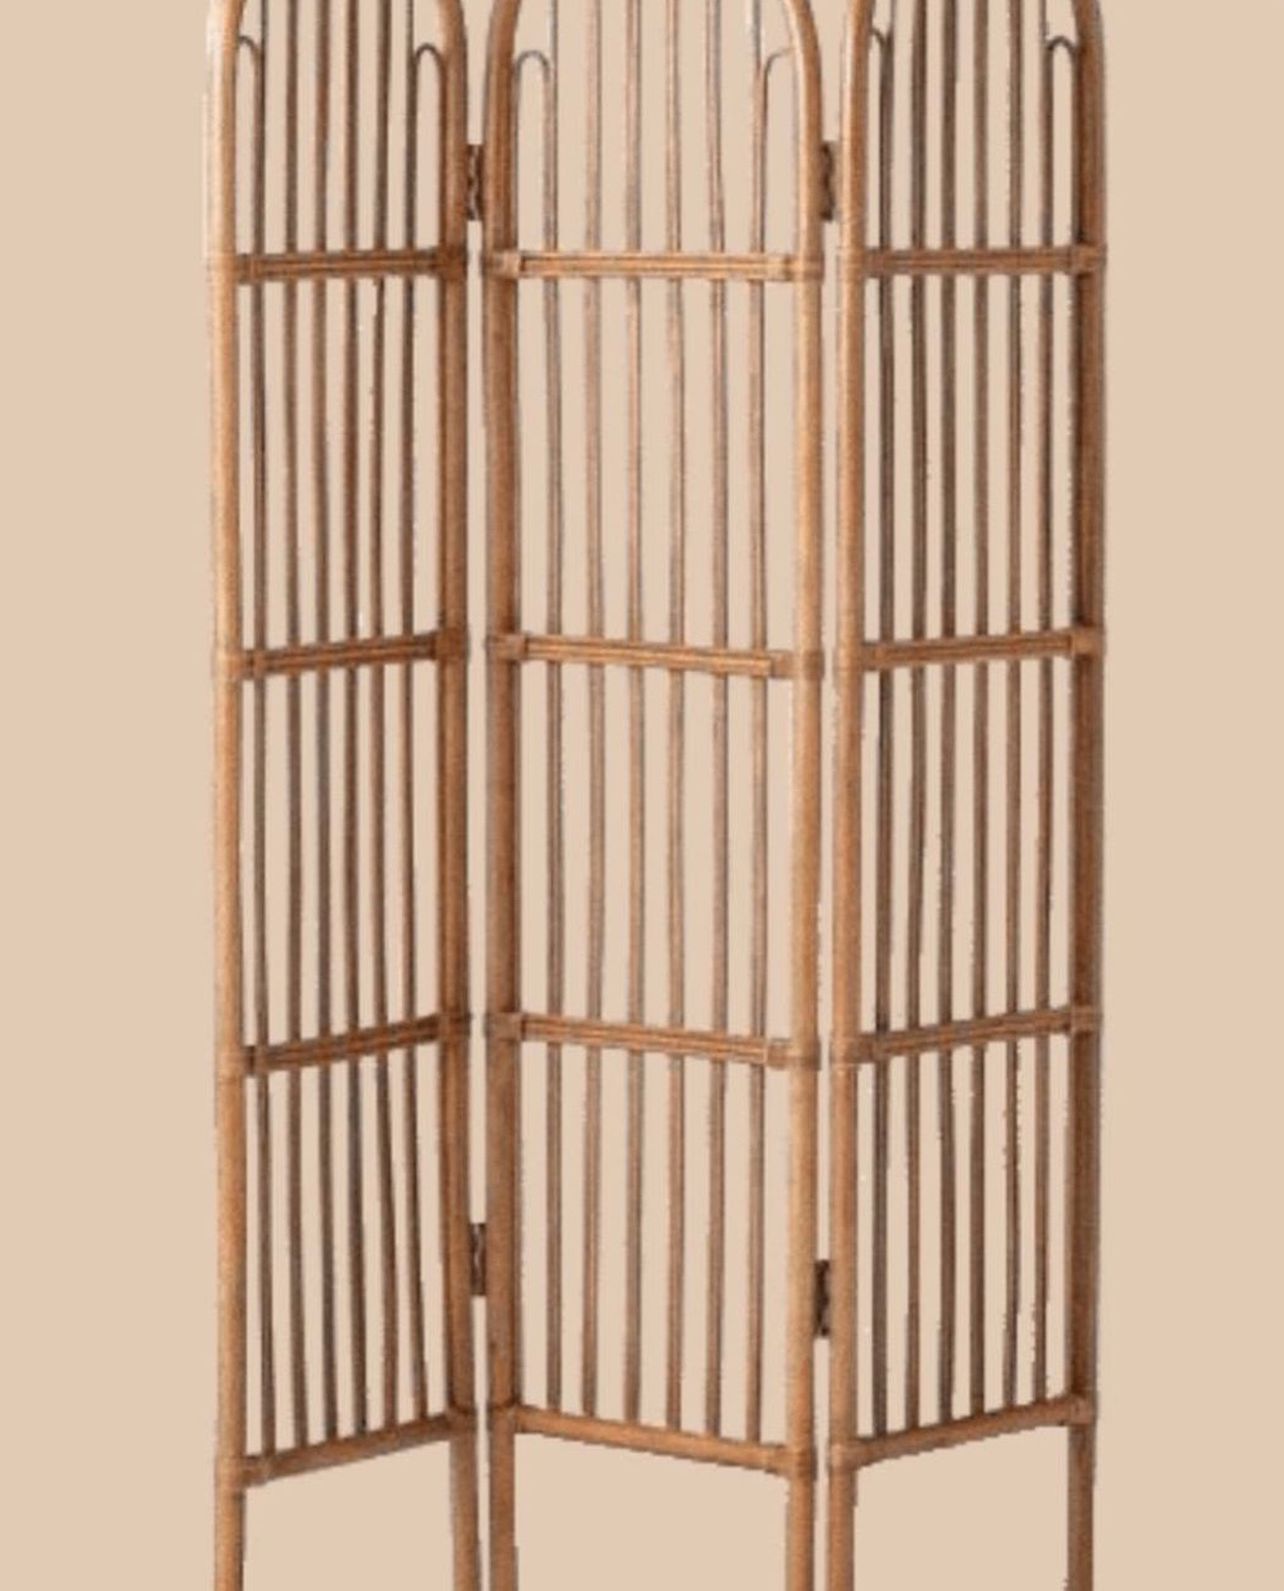 Boho Rattan Divider Sold Out In Stores Unique Desirable Bohemian HomeDecor